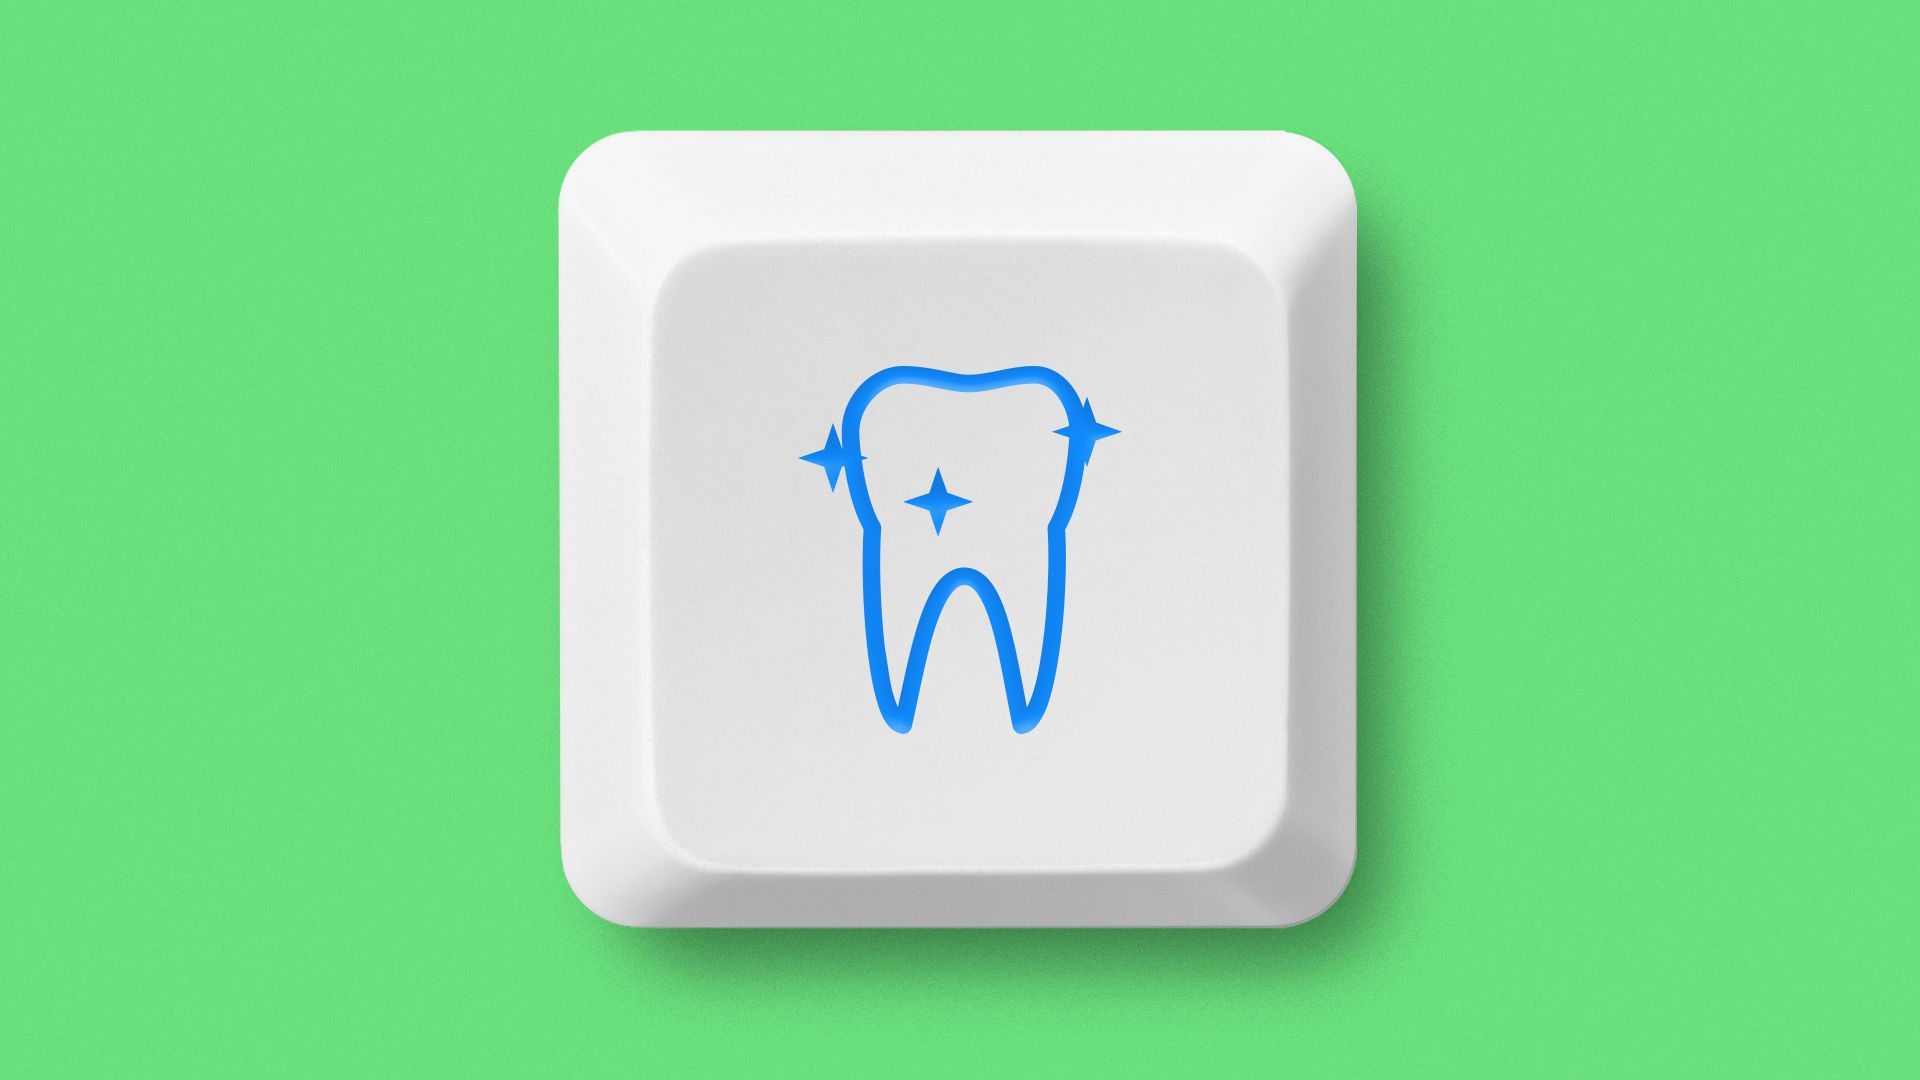 Illustration of a computer keyboard key with an icon of a tooth on it.